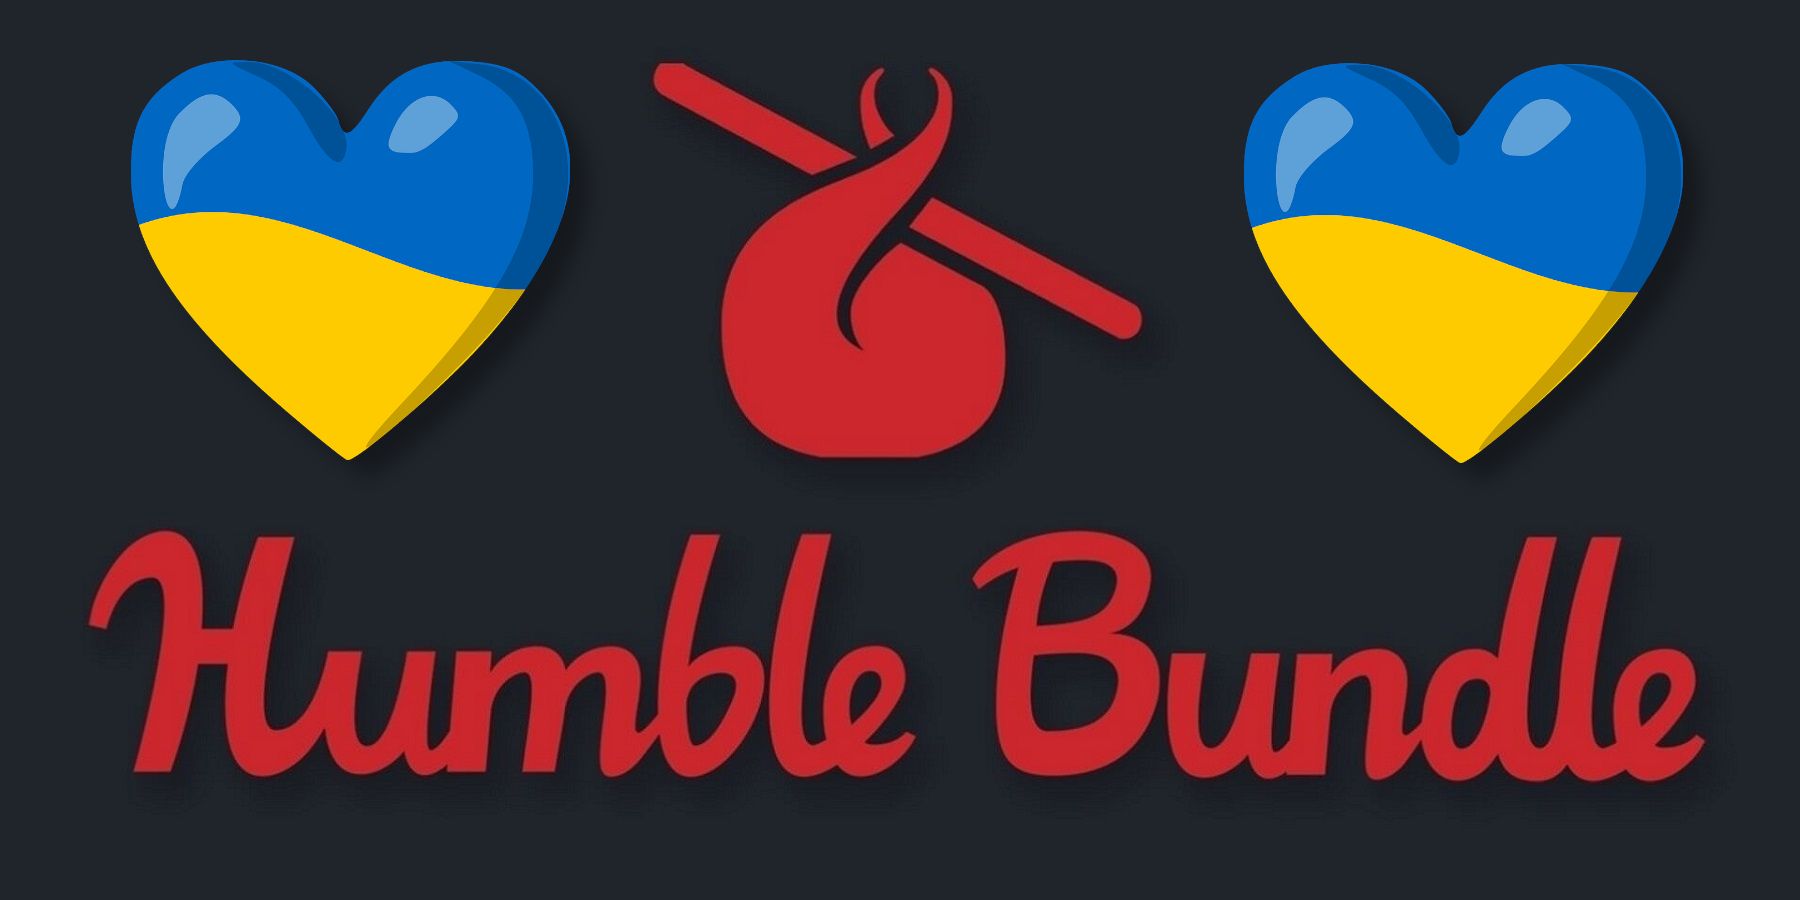 The Humble Bundle logo with two hearts either side that have the colors of the Ukrainian flag.